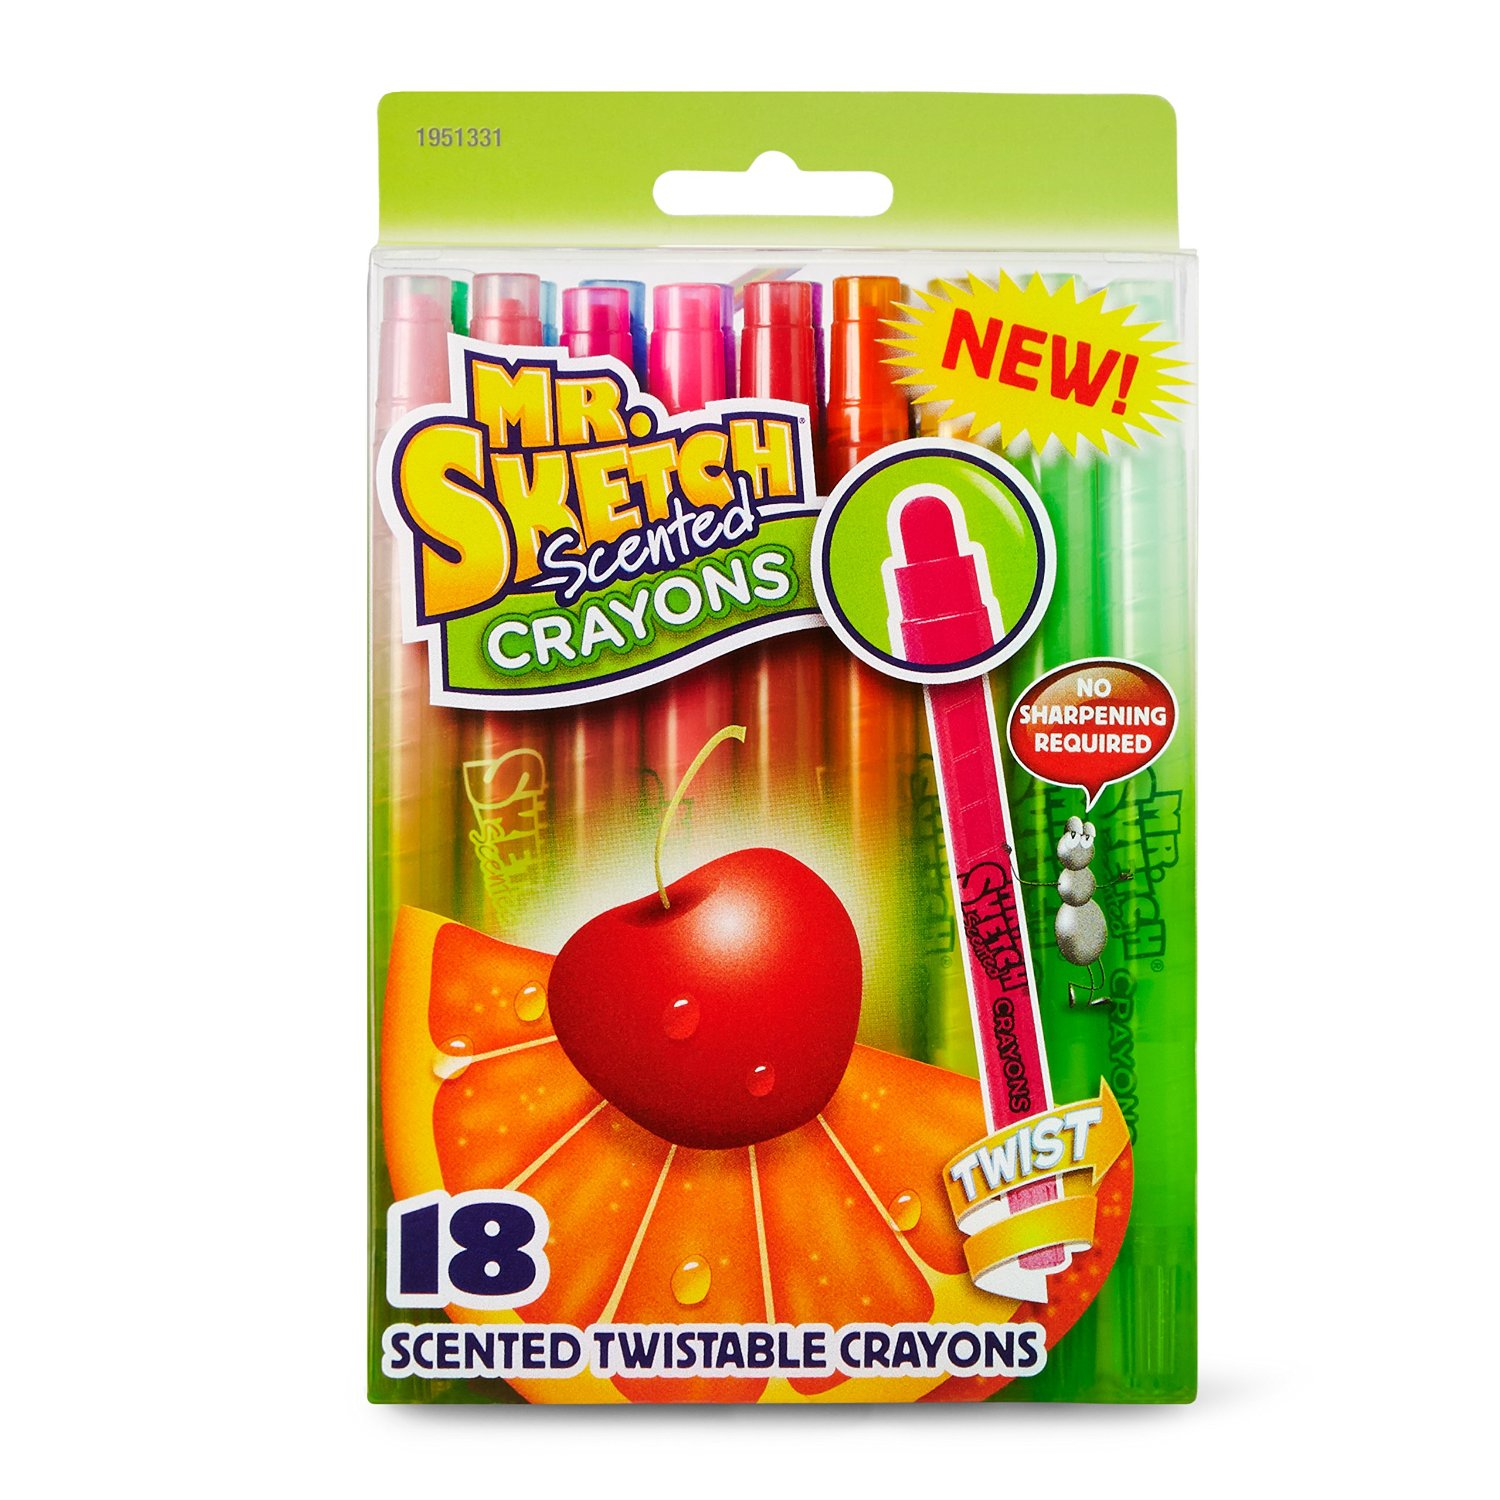 HOT! Mr. Sketch Scented Twistable Crayons 18 Count Only $6.49!